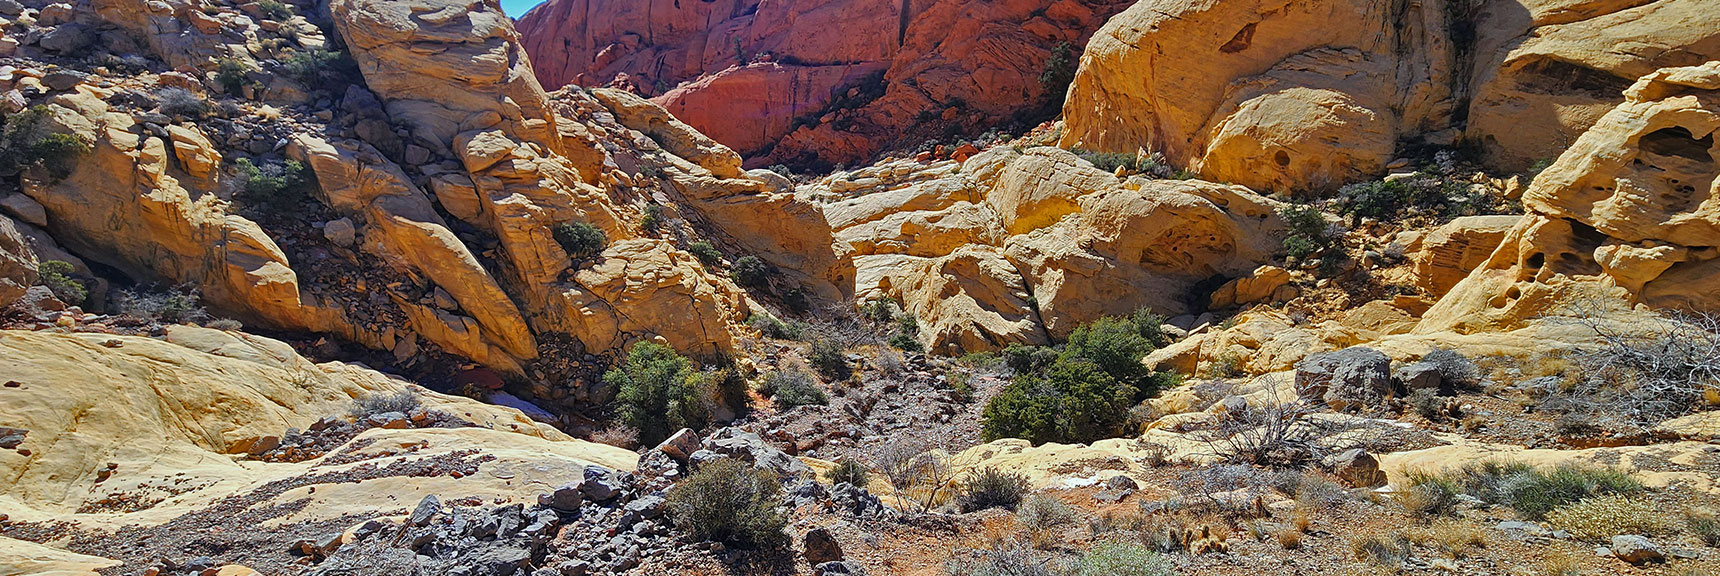 Options: Descend to Right or Ascend to Left of White Sandstone Formation | Pink Goblin Loop | Calico Basin, Nevada